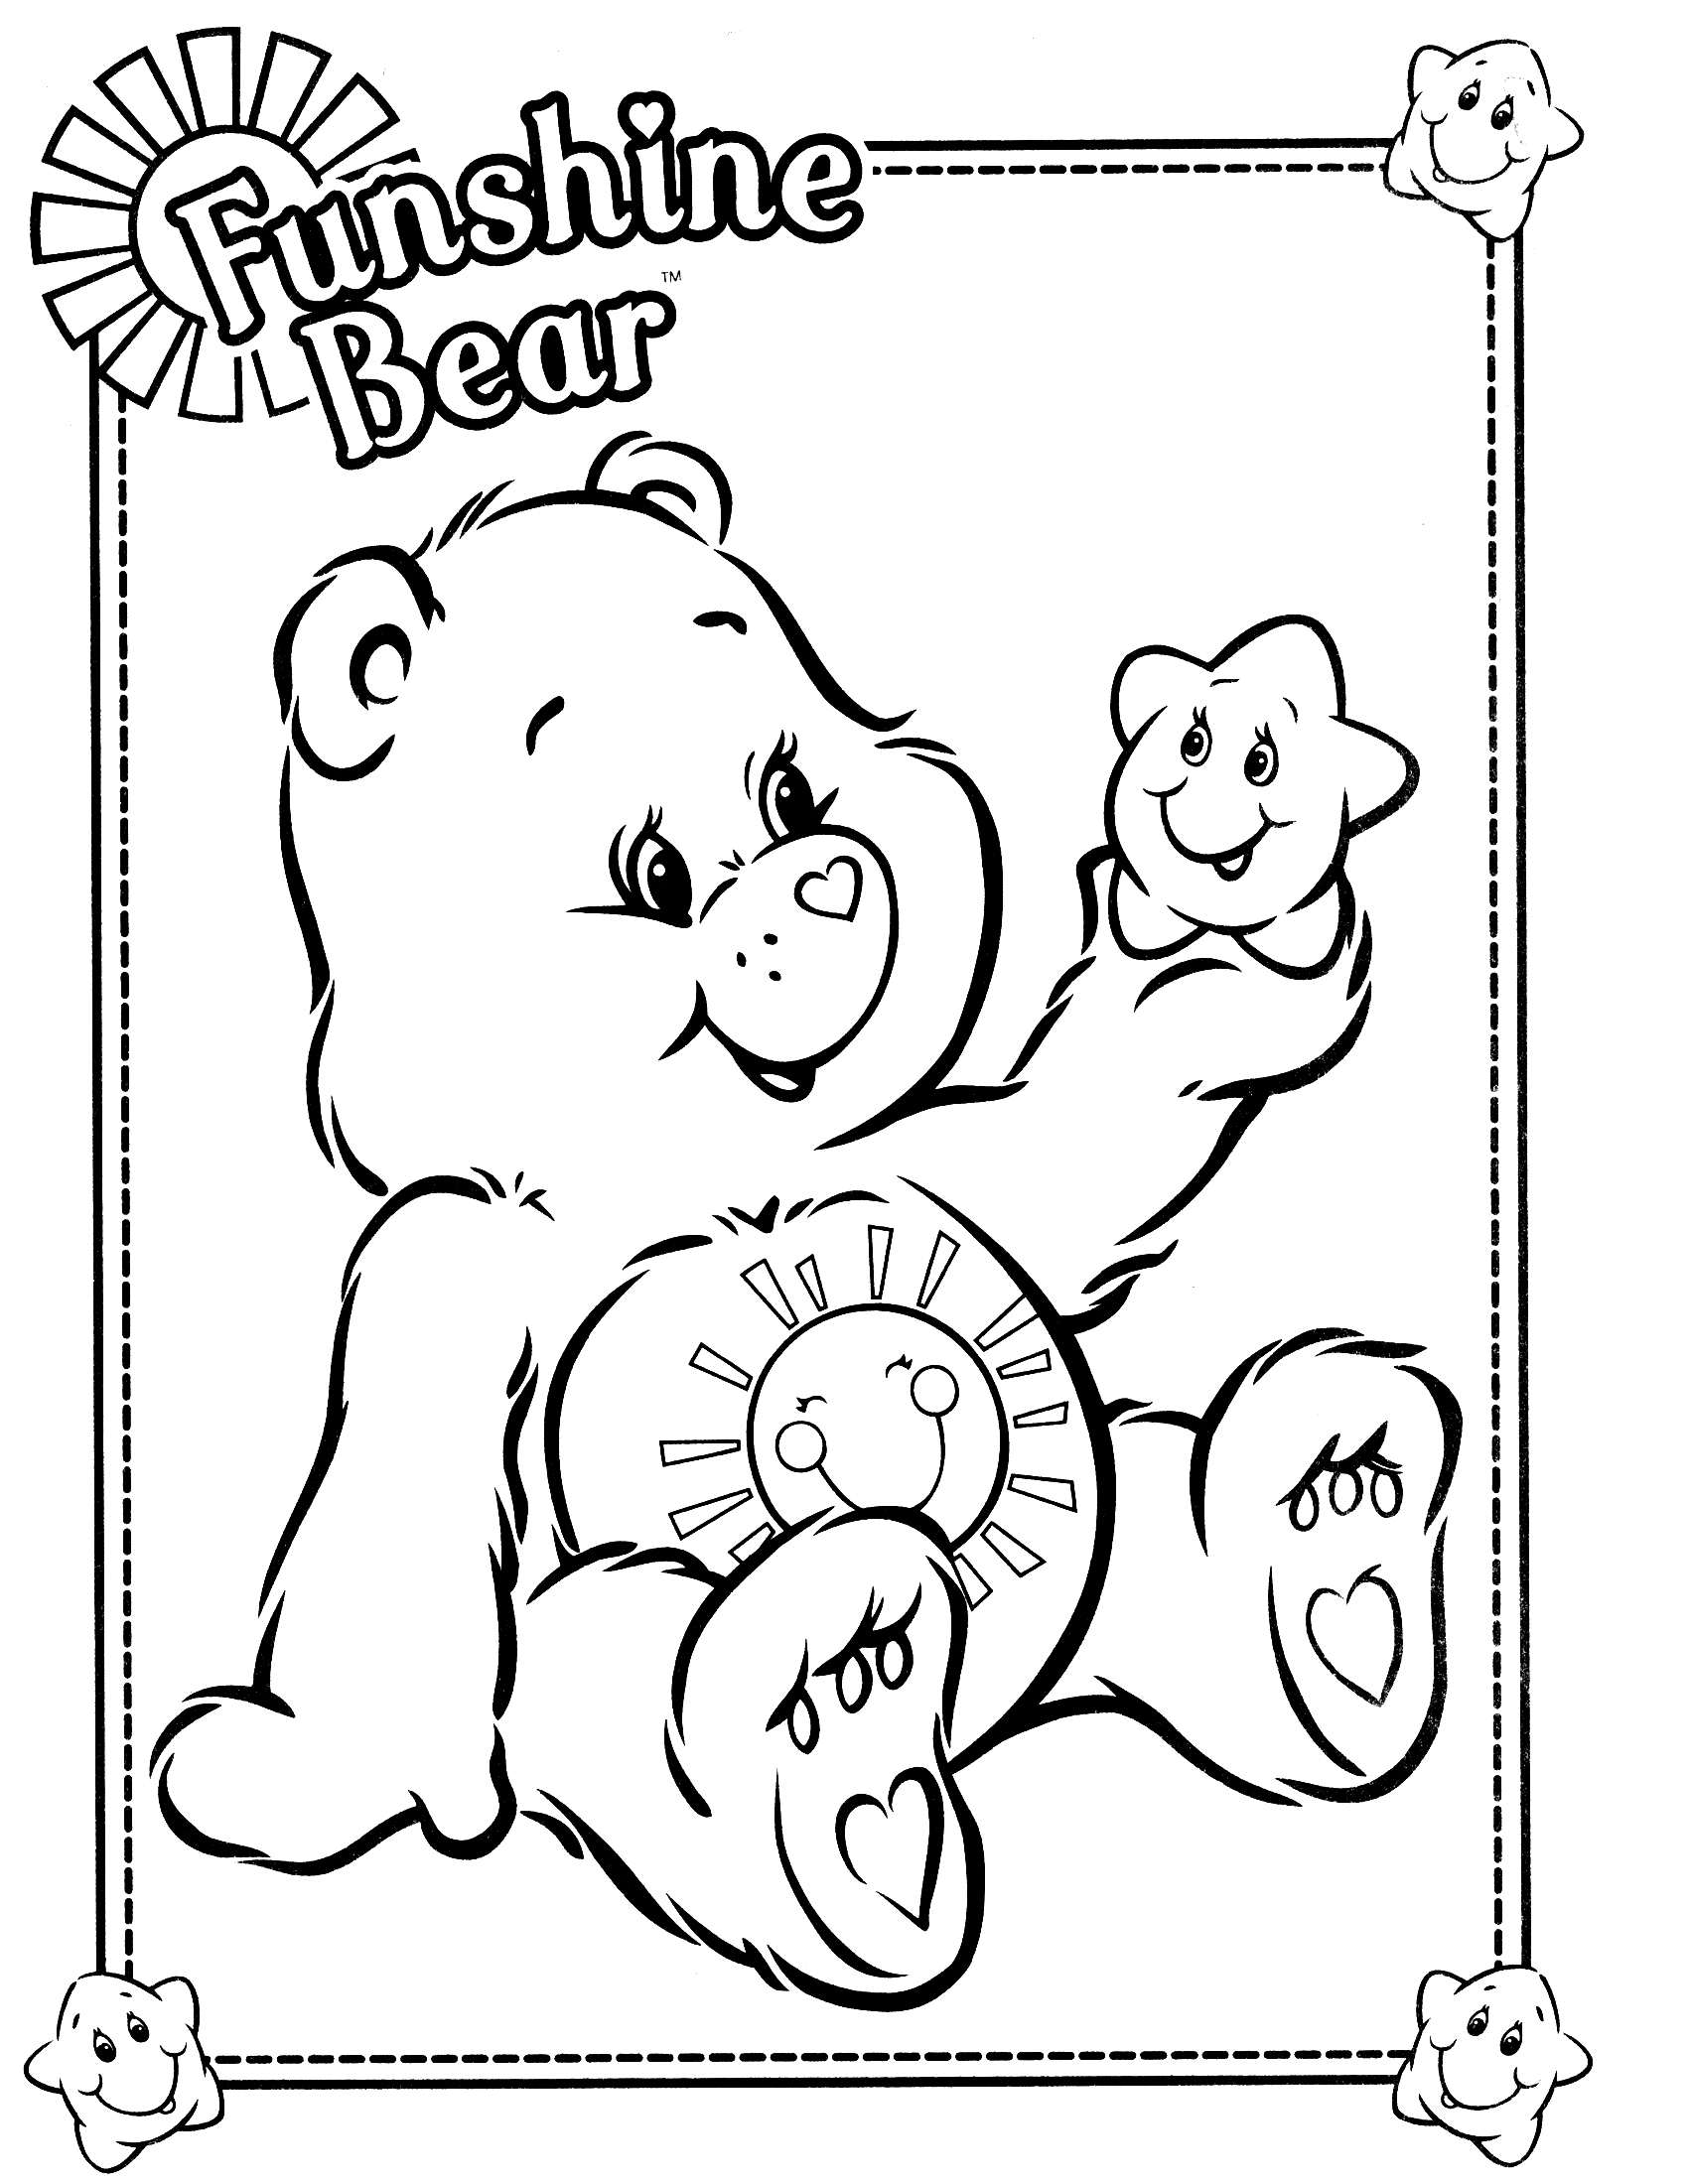 Care Bears #37 (Cartoons) Printable coloring pages